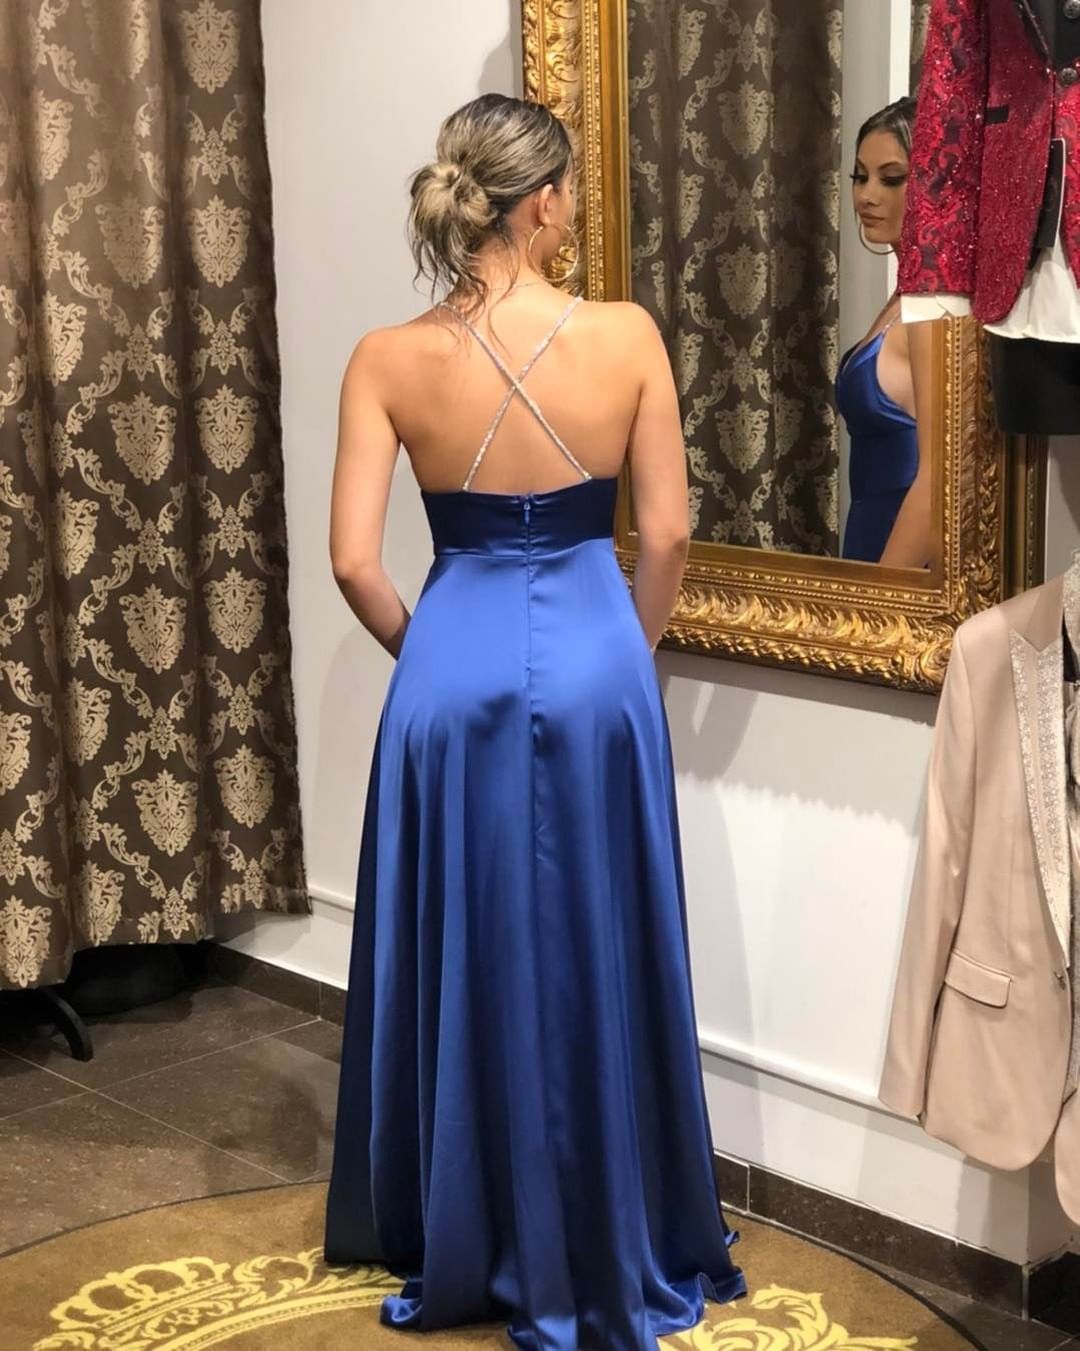 Royal Blue Spaghetti Straps Prom Dress with Front Split